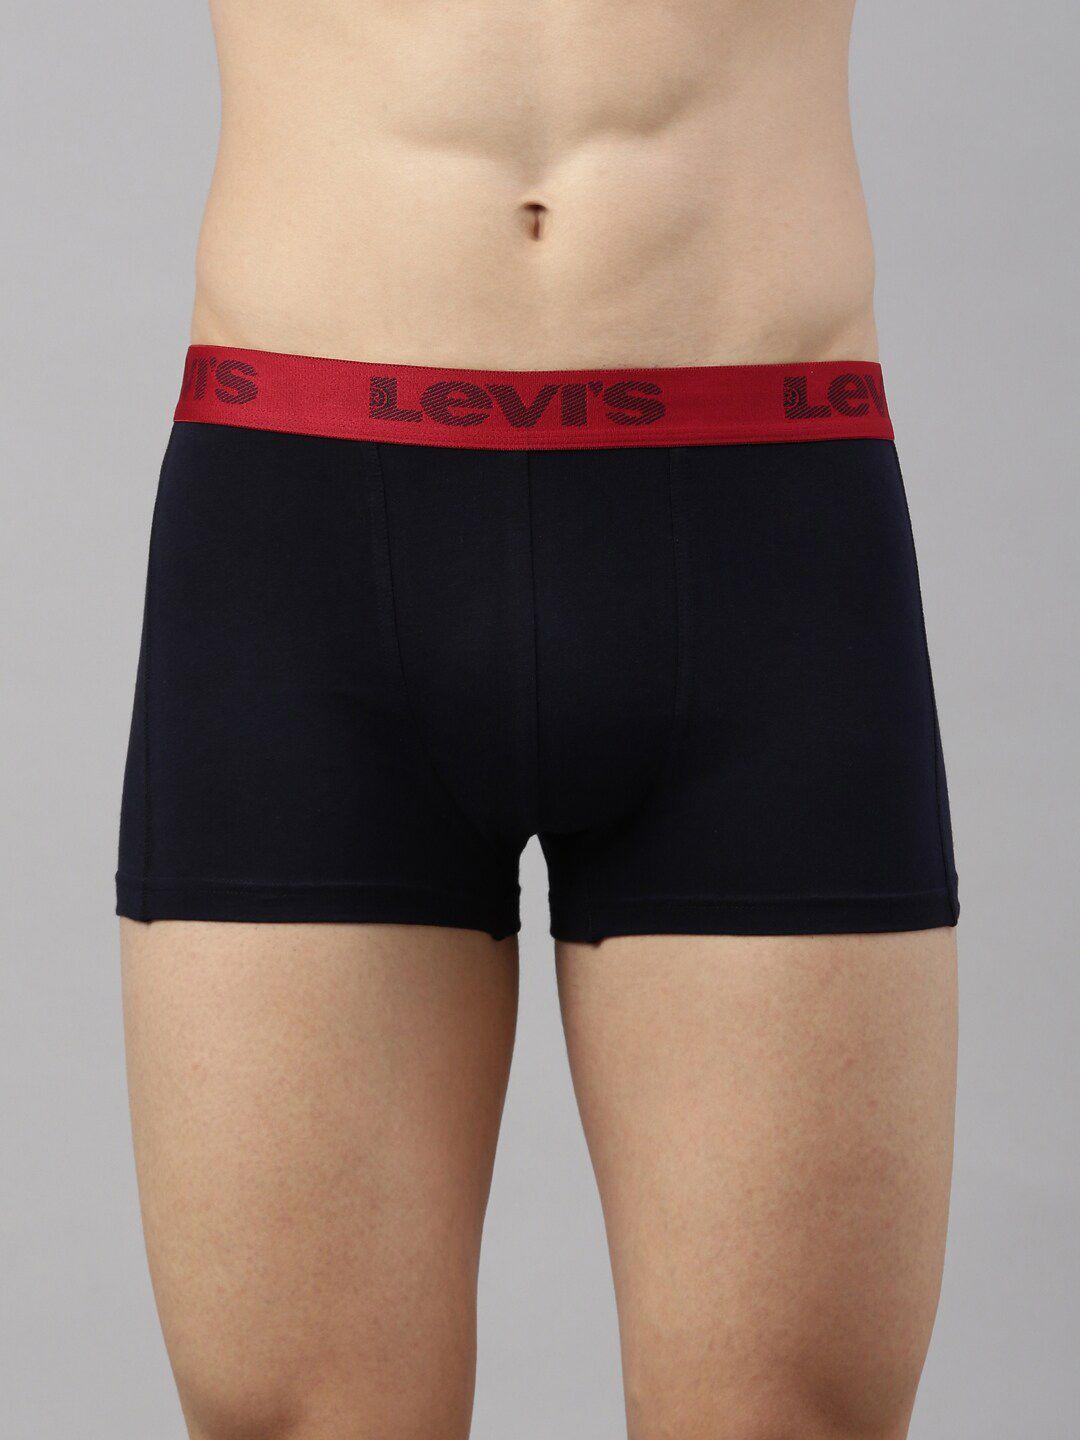 levis men smartskin technology active trunks with tag free comfort #067